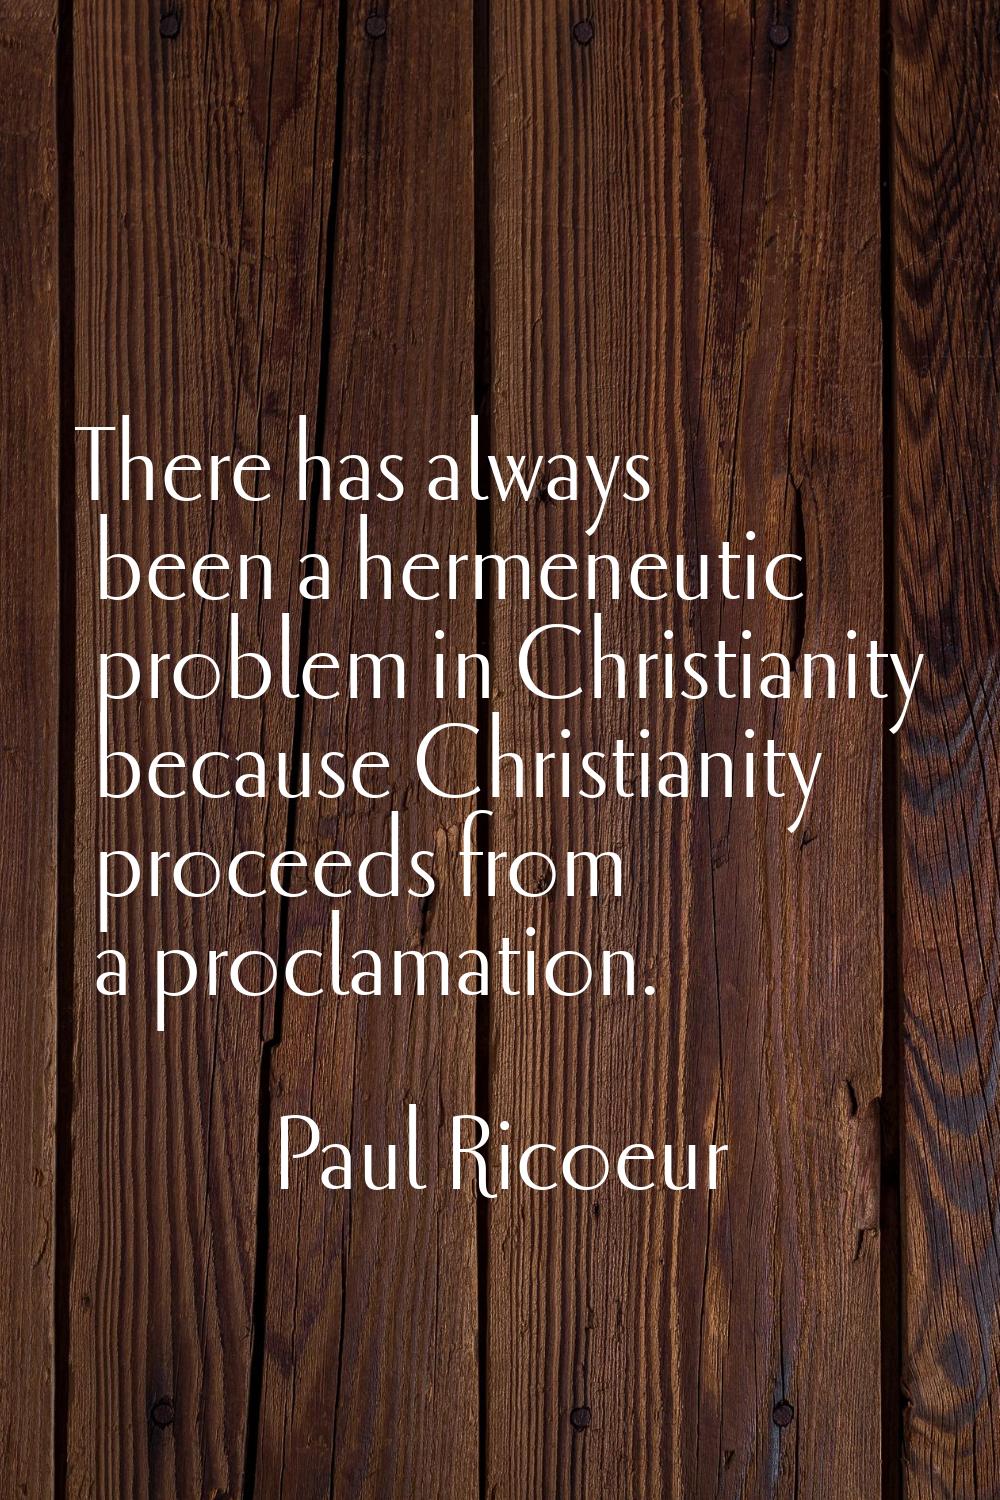 There has always been a hermeneutic problem in Christianity because Christianity proceeds from a pr